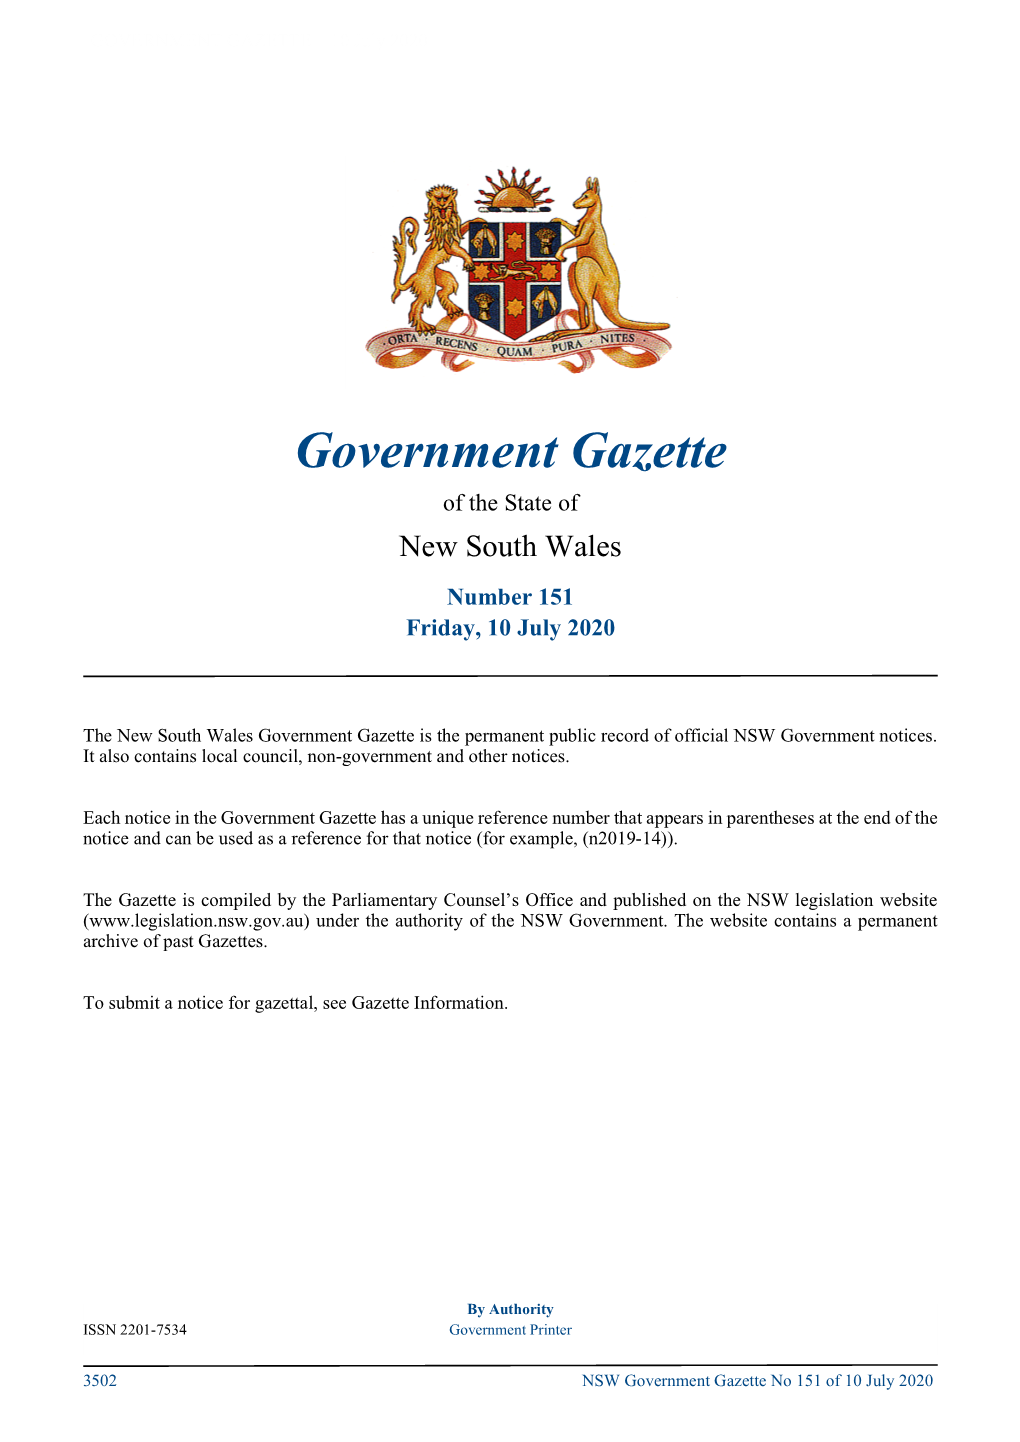 Government Gazette No 151 of Friday 10 July 2020